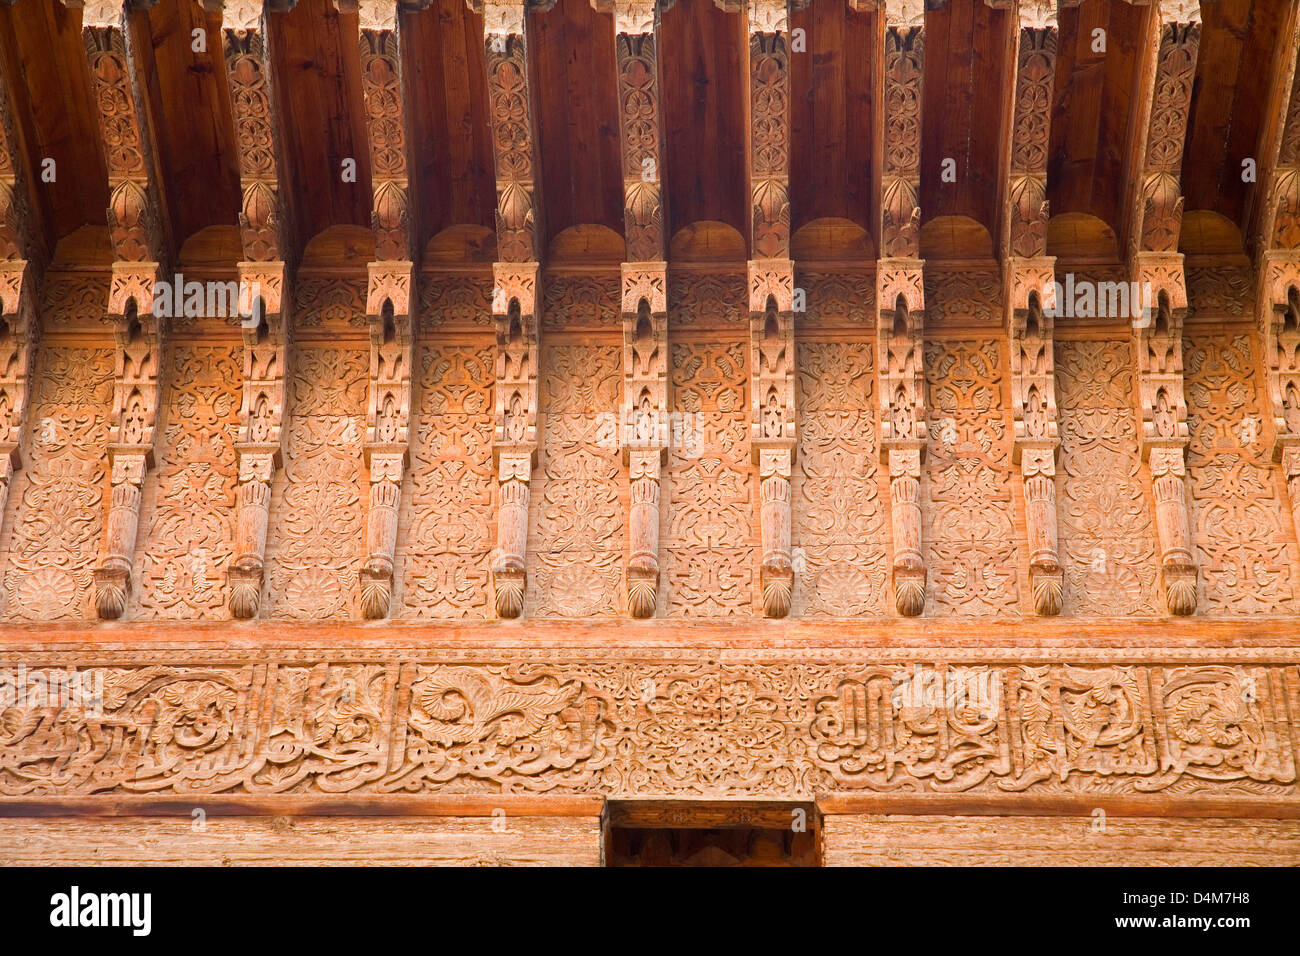 africa, morocco, marrakech, tombs of the saadiens, carving on wood Stock Photo